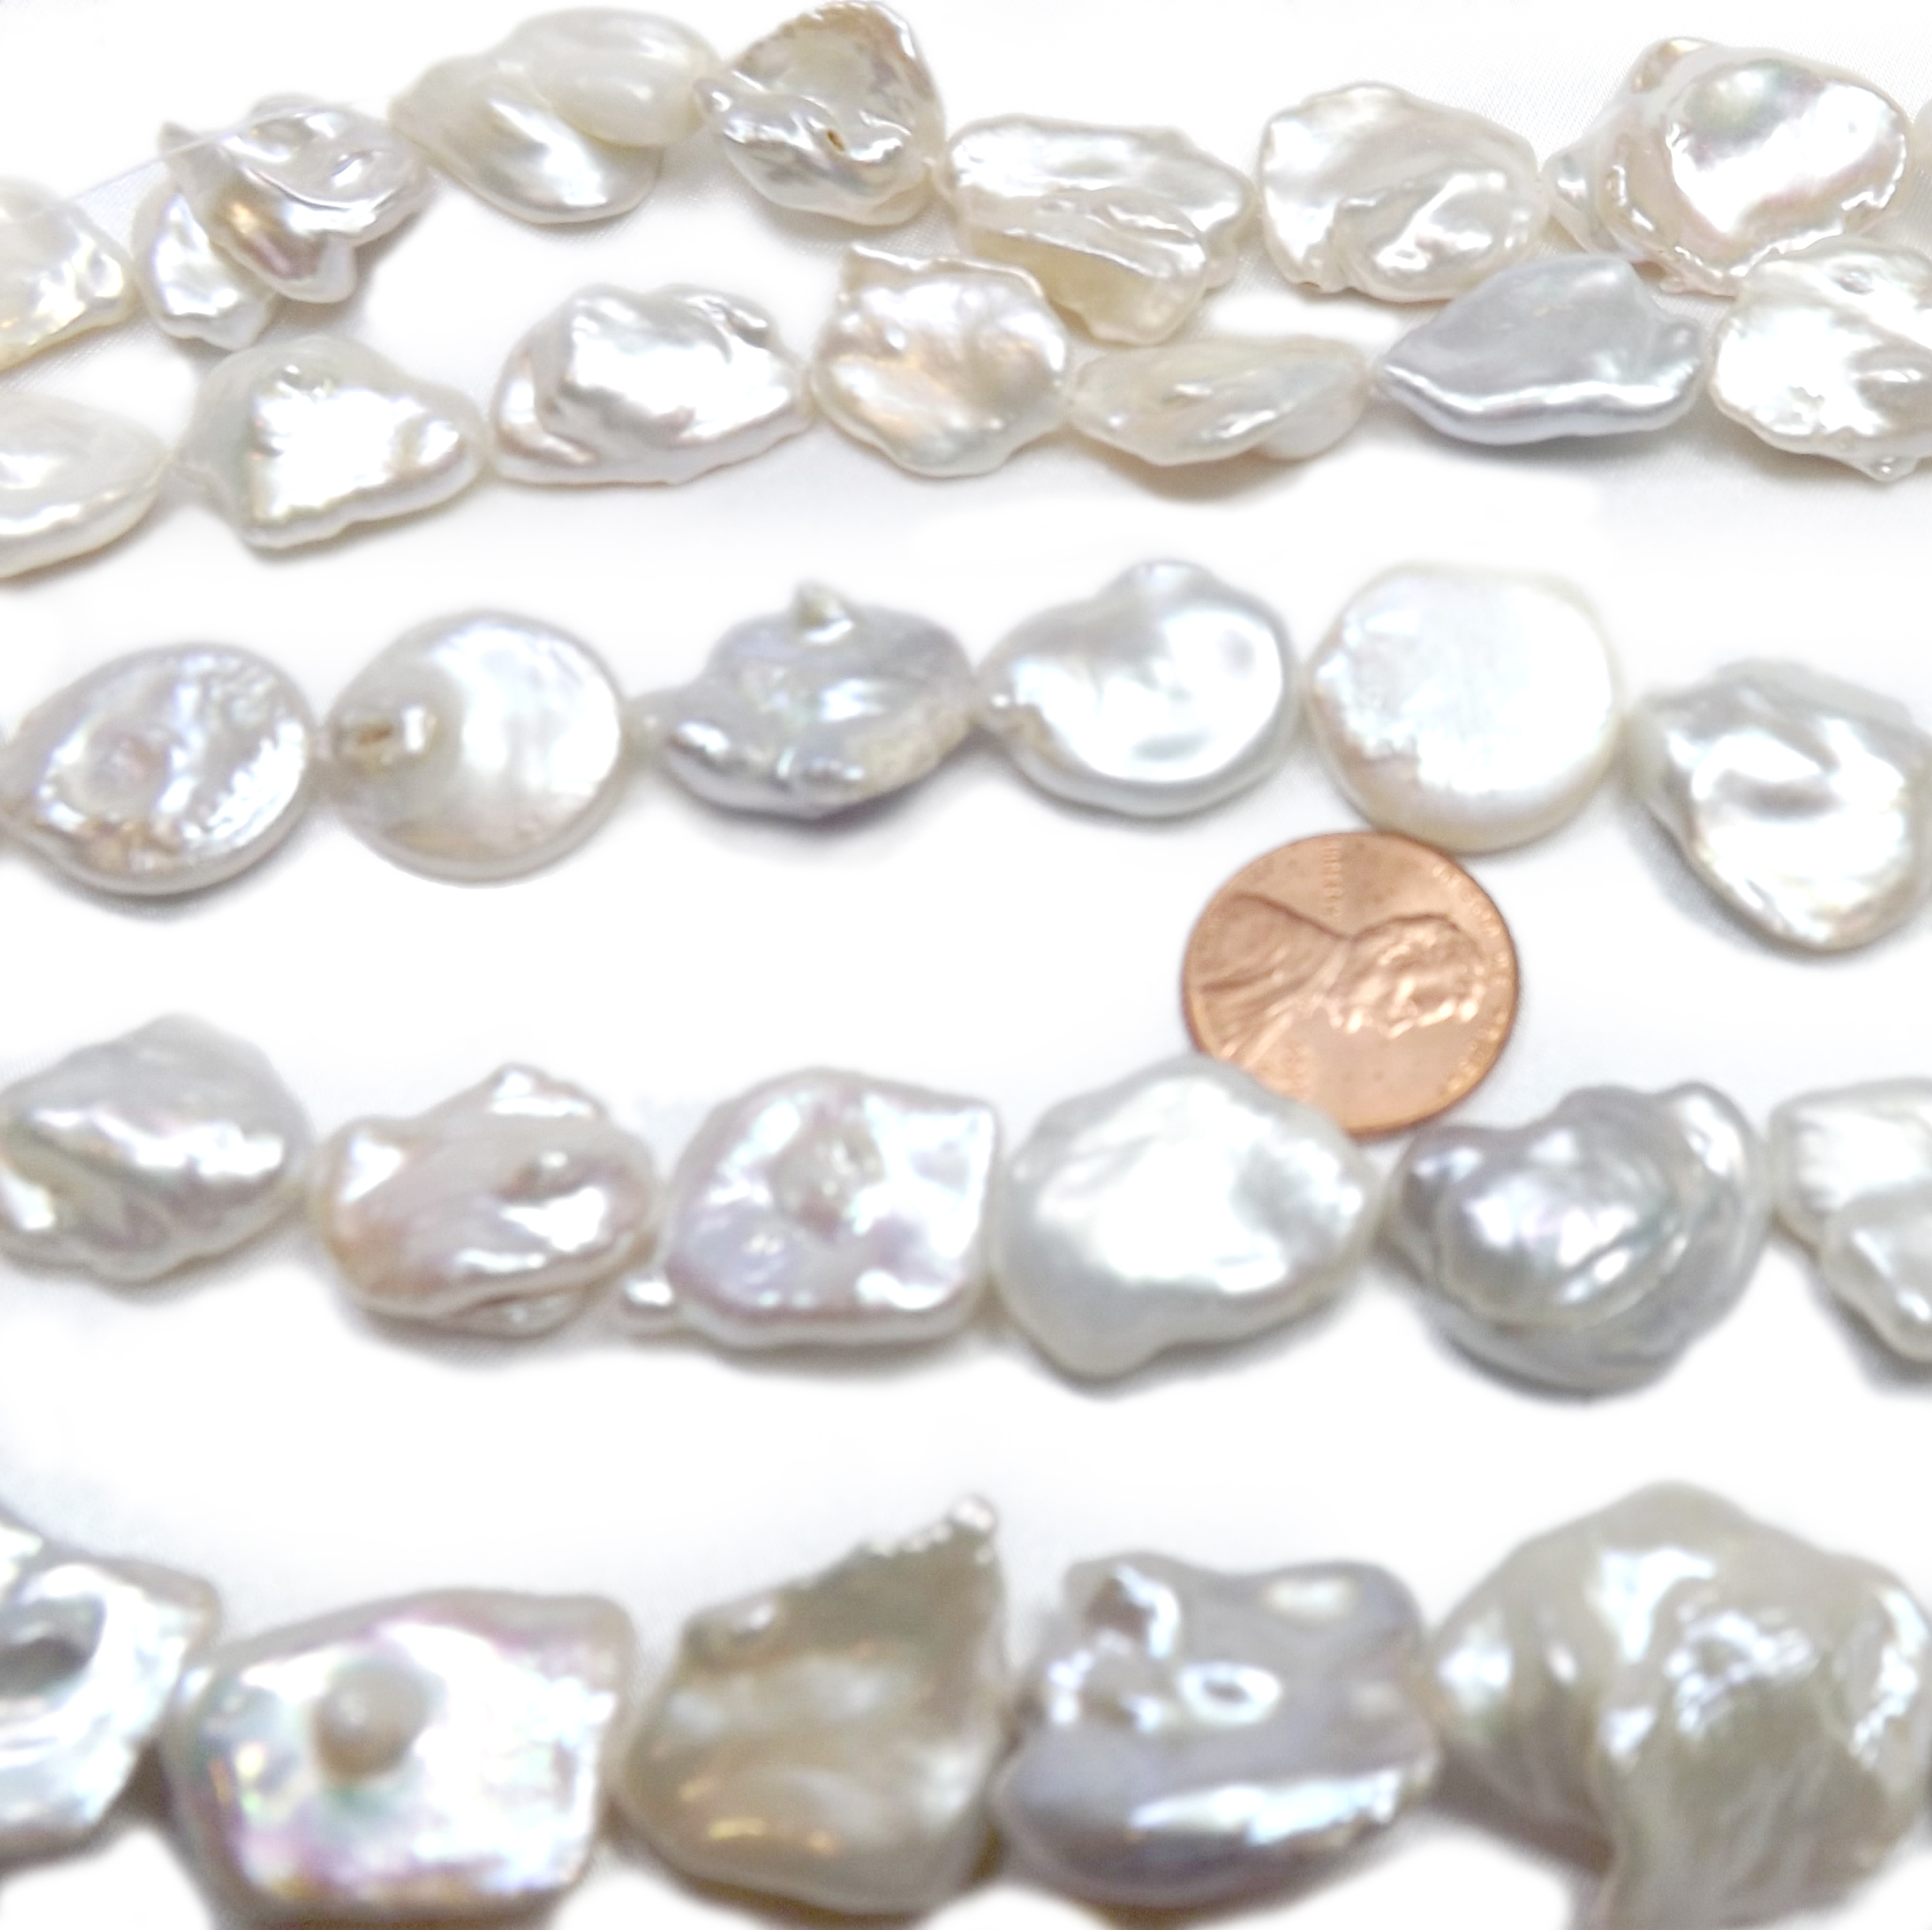 15-20mm Huge Baroque Pearls Strand High Luster White or Pink Pearls